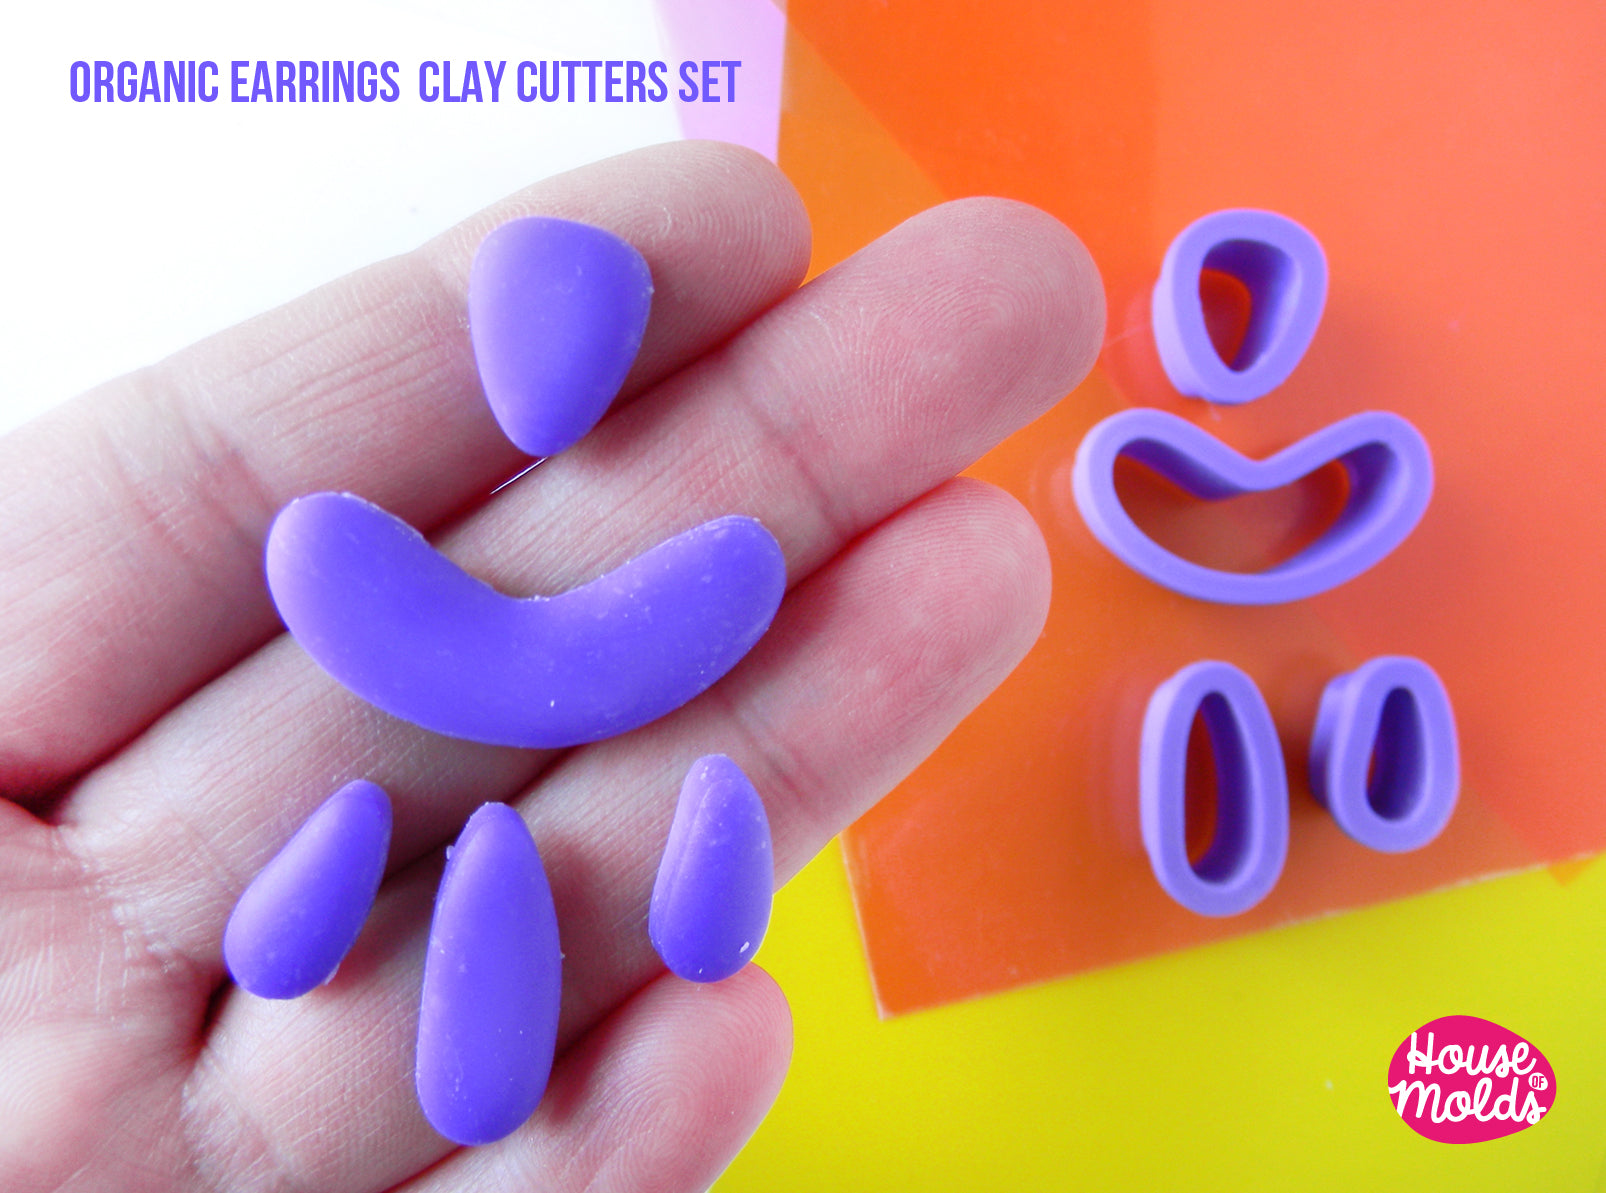 HALF DAISY CLAY CUTTER - BIOBASED PLA - CLEAN CUT EDGES – House Of Molds